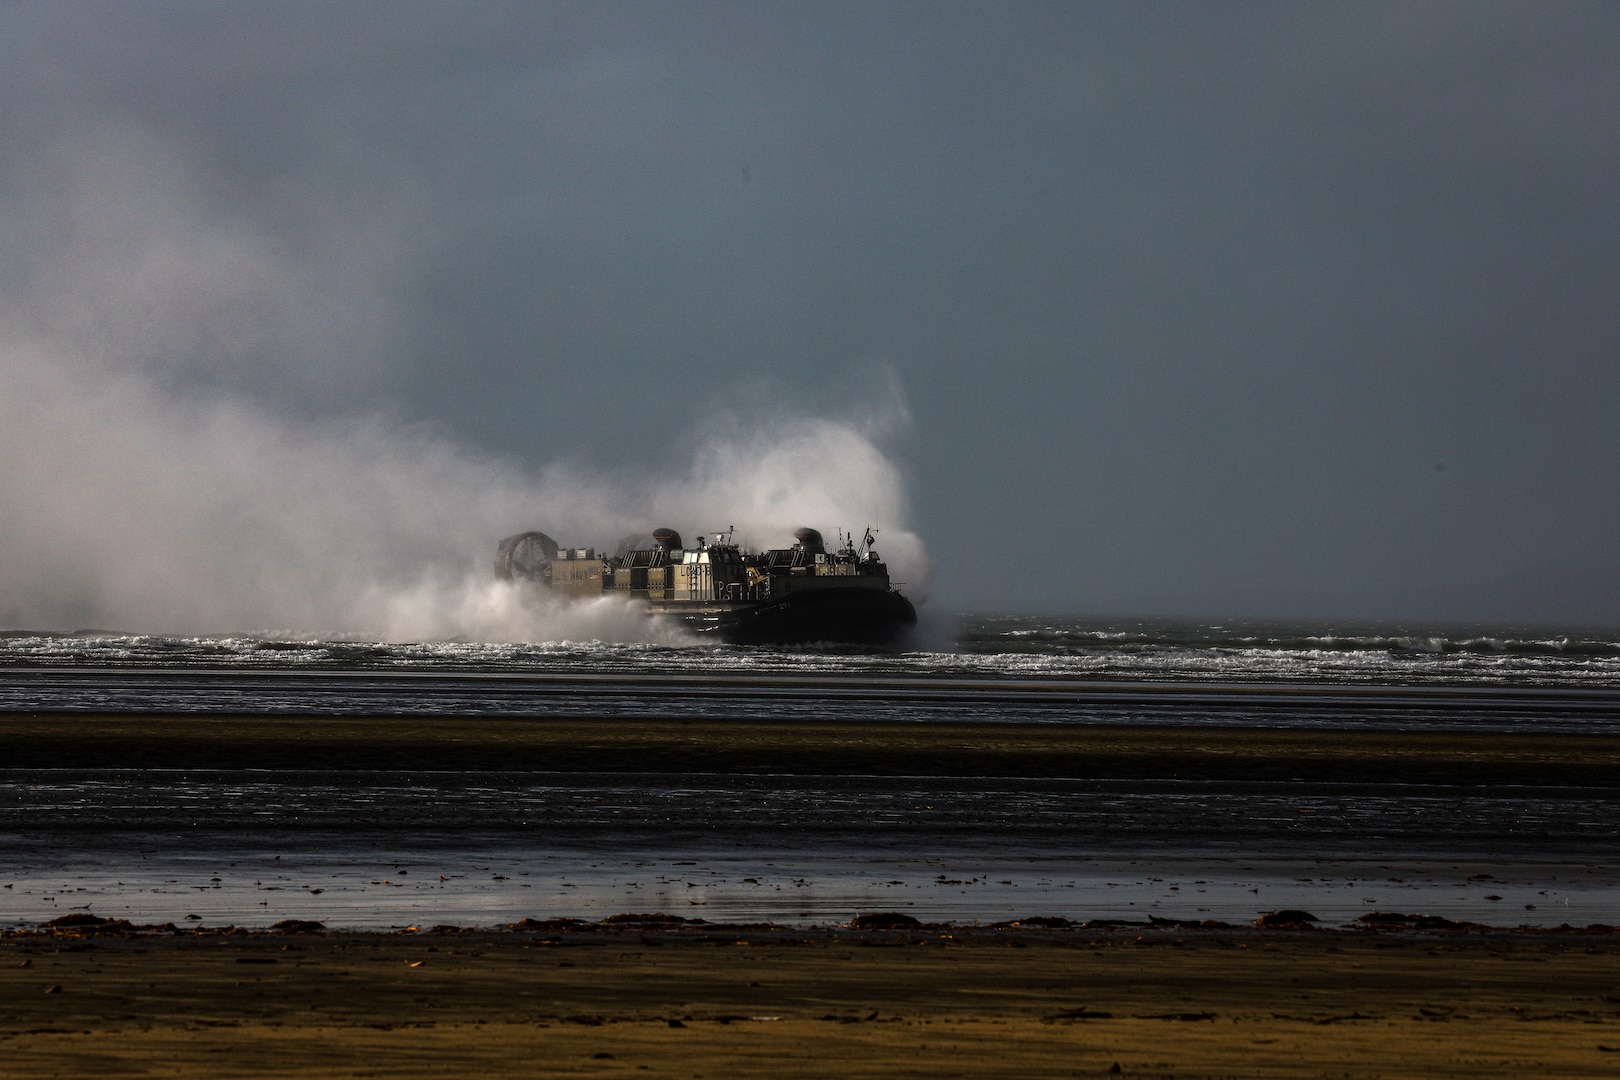 A U.S. Navy Landing Craft Air Cushion lands ashore as a part of Talisman Sabre 23 in Midge Point, Australia, July 25, 2023. Amphibious operations provide a Combined-Joint Force Commander the capability to rapidly project power ashore in support of crisis response at the desired time and location. (U.S. Army Photo by Staff Sgt. Jessica Elbouab)